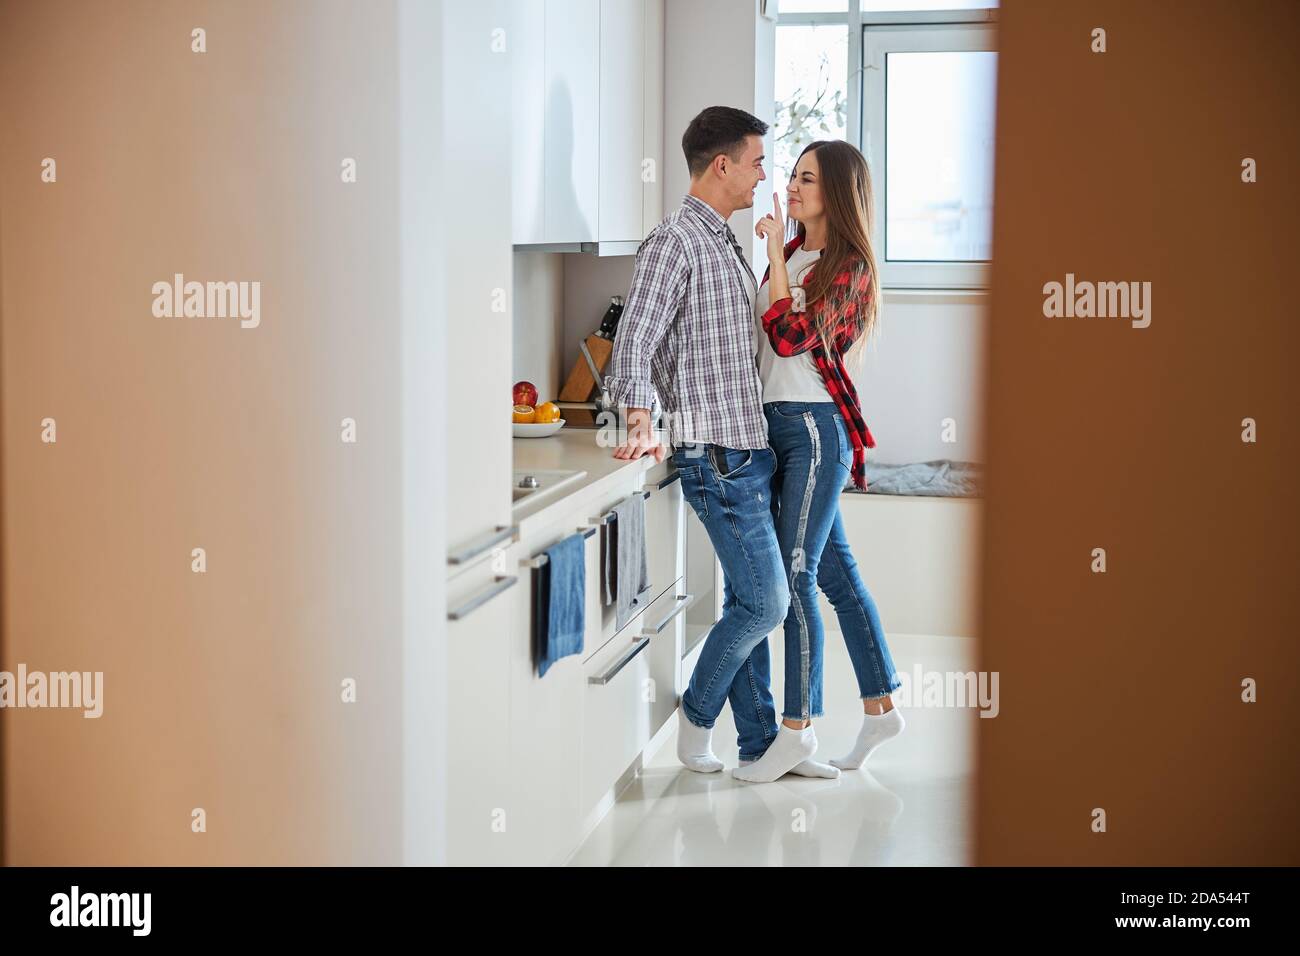 Mischievous woman teasing her husband in the kitchen Stock Photo